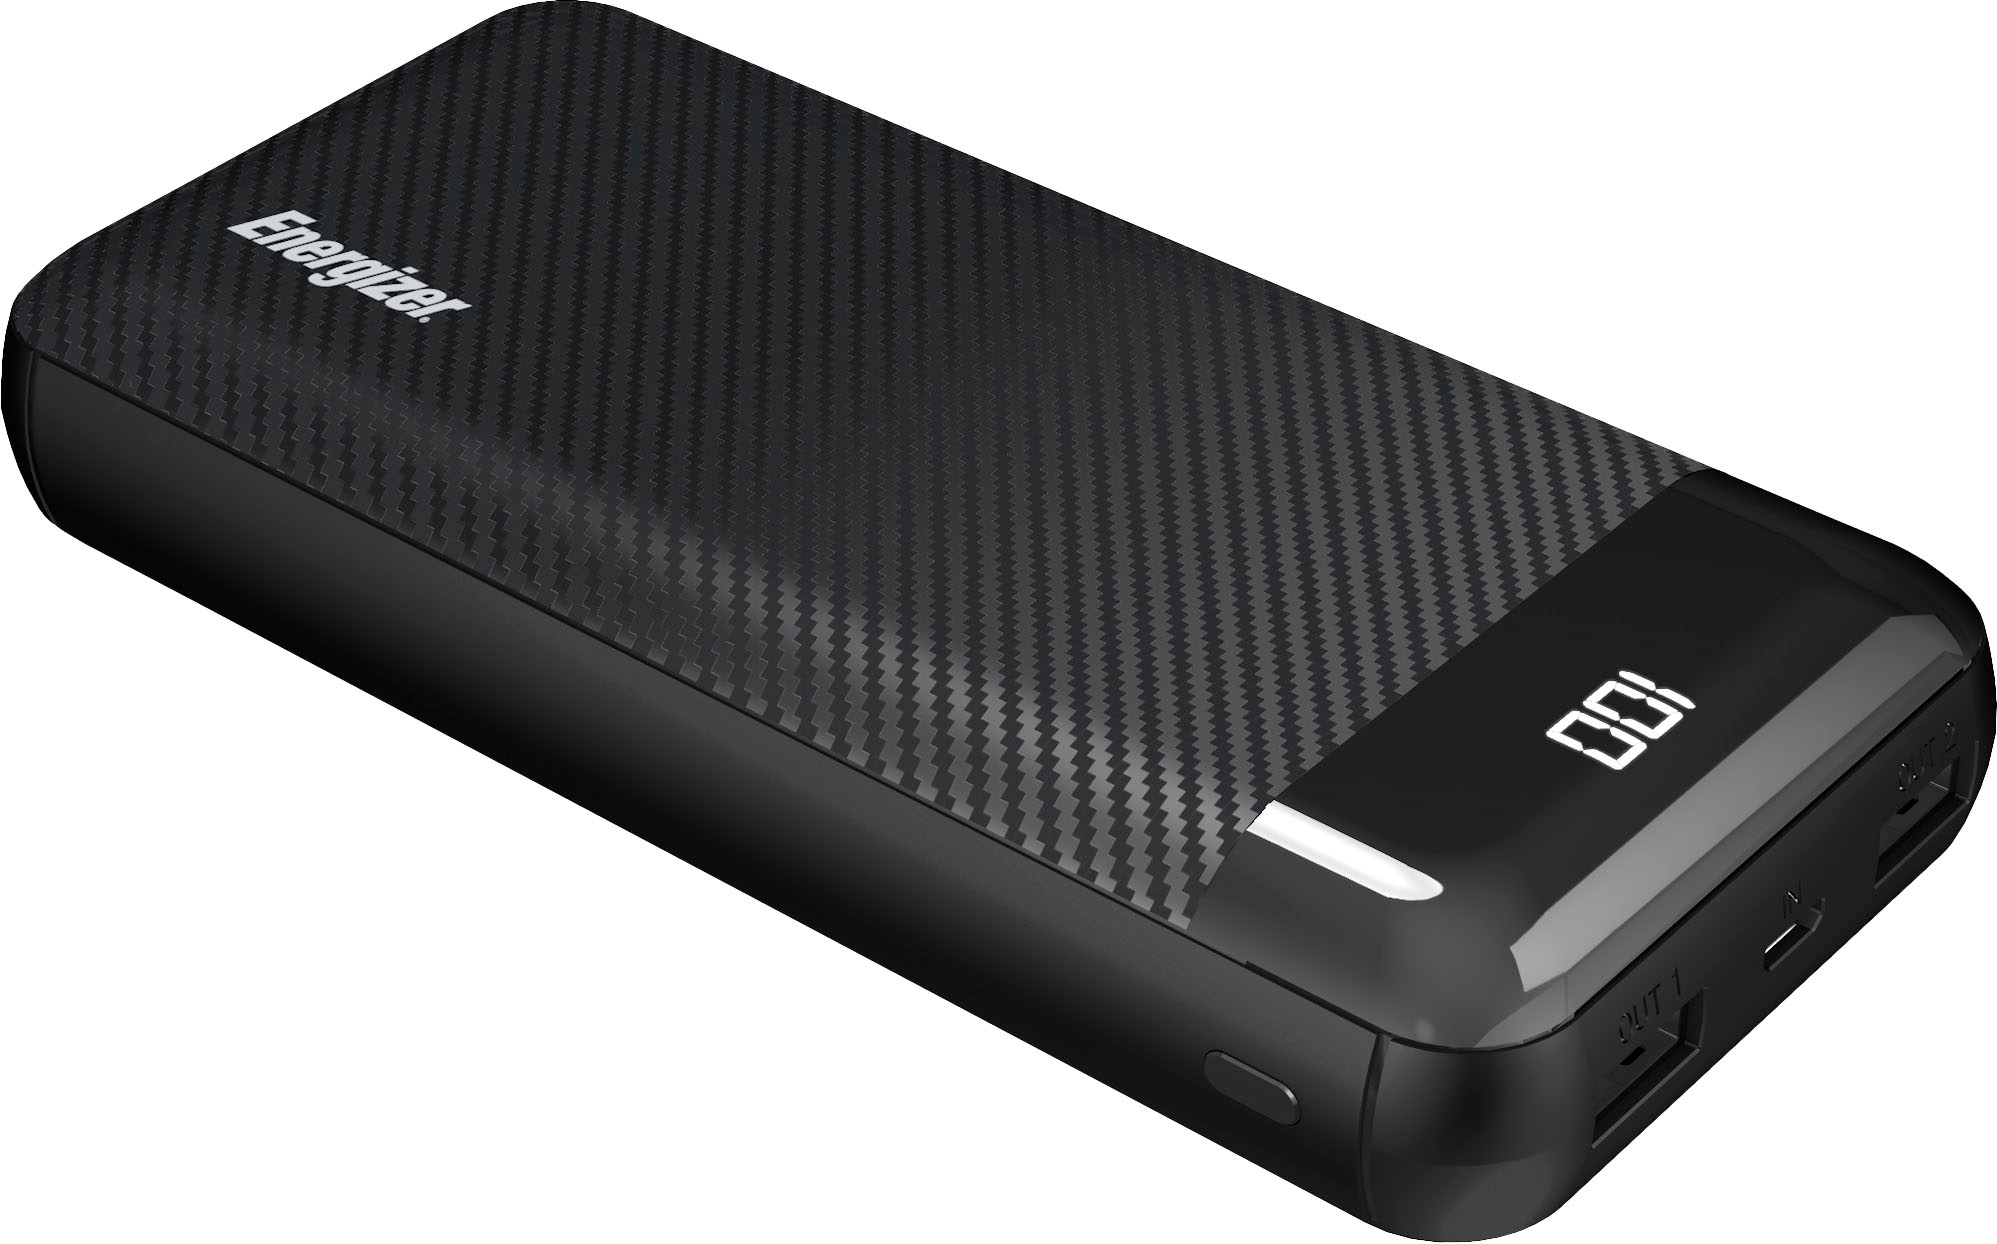 Energizer MAX 20,000mAh High Speed Universal Portable Charger/Power Bank  with LCD Display for Apple, Android, Google & USB Devices Black UE20068 -  Best Buy